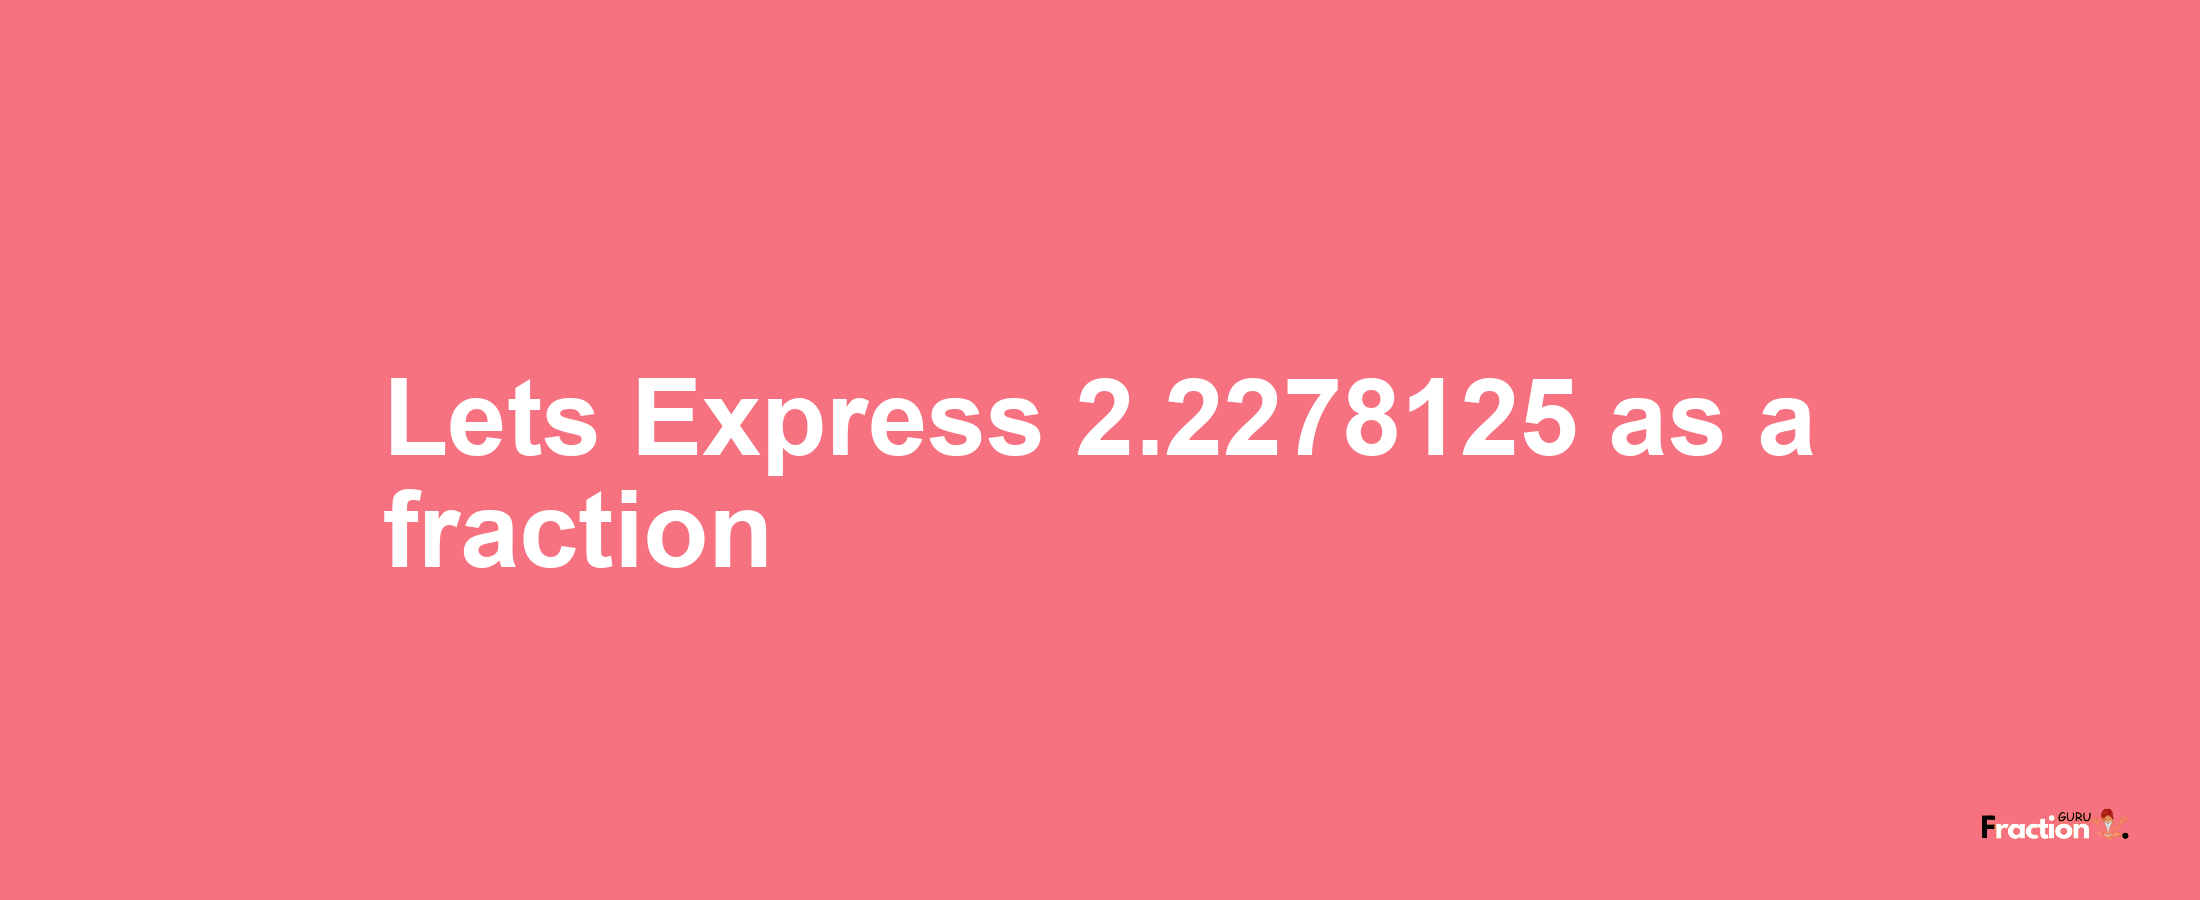 Lets Express 2.2278125 as afraction